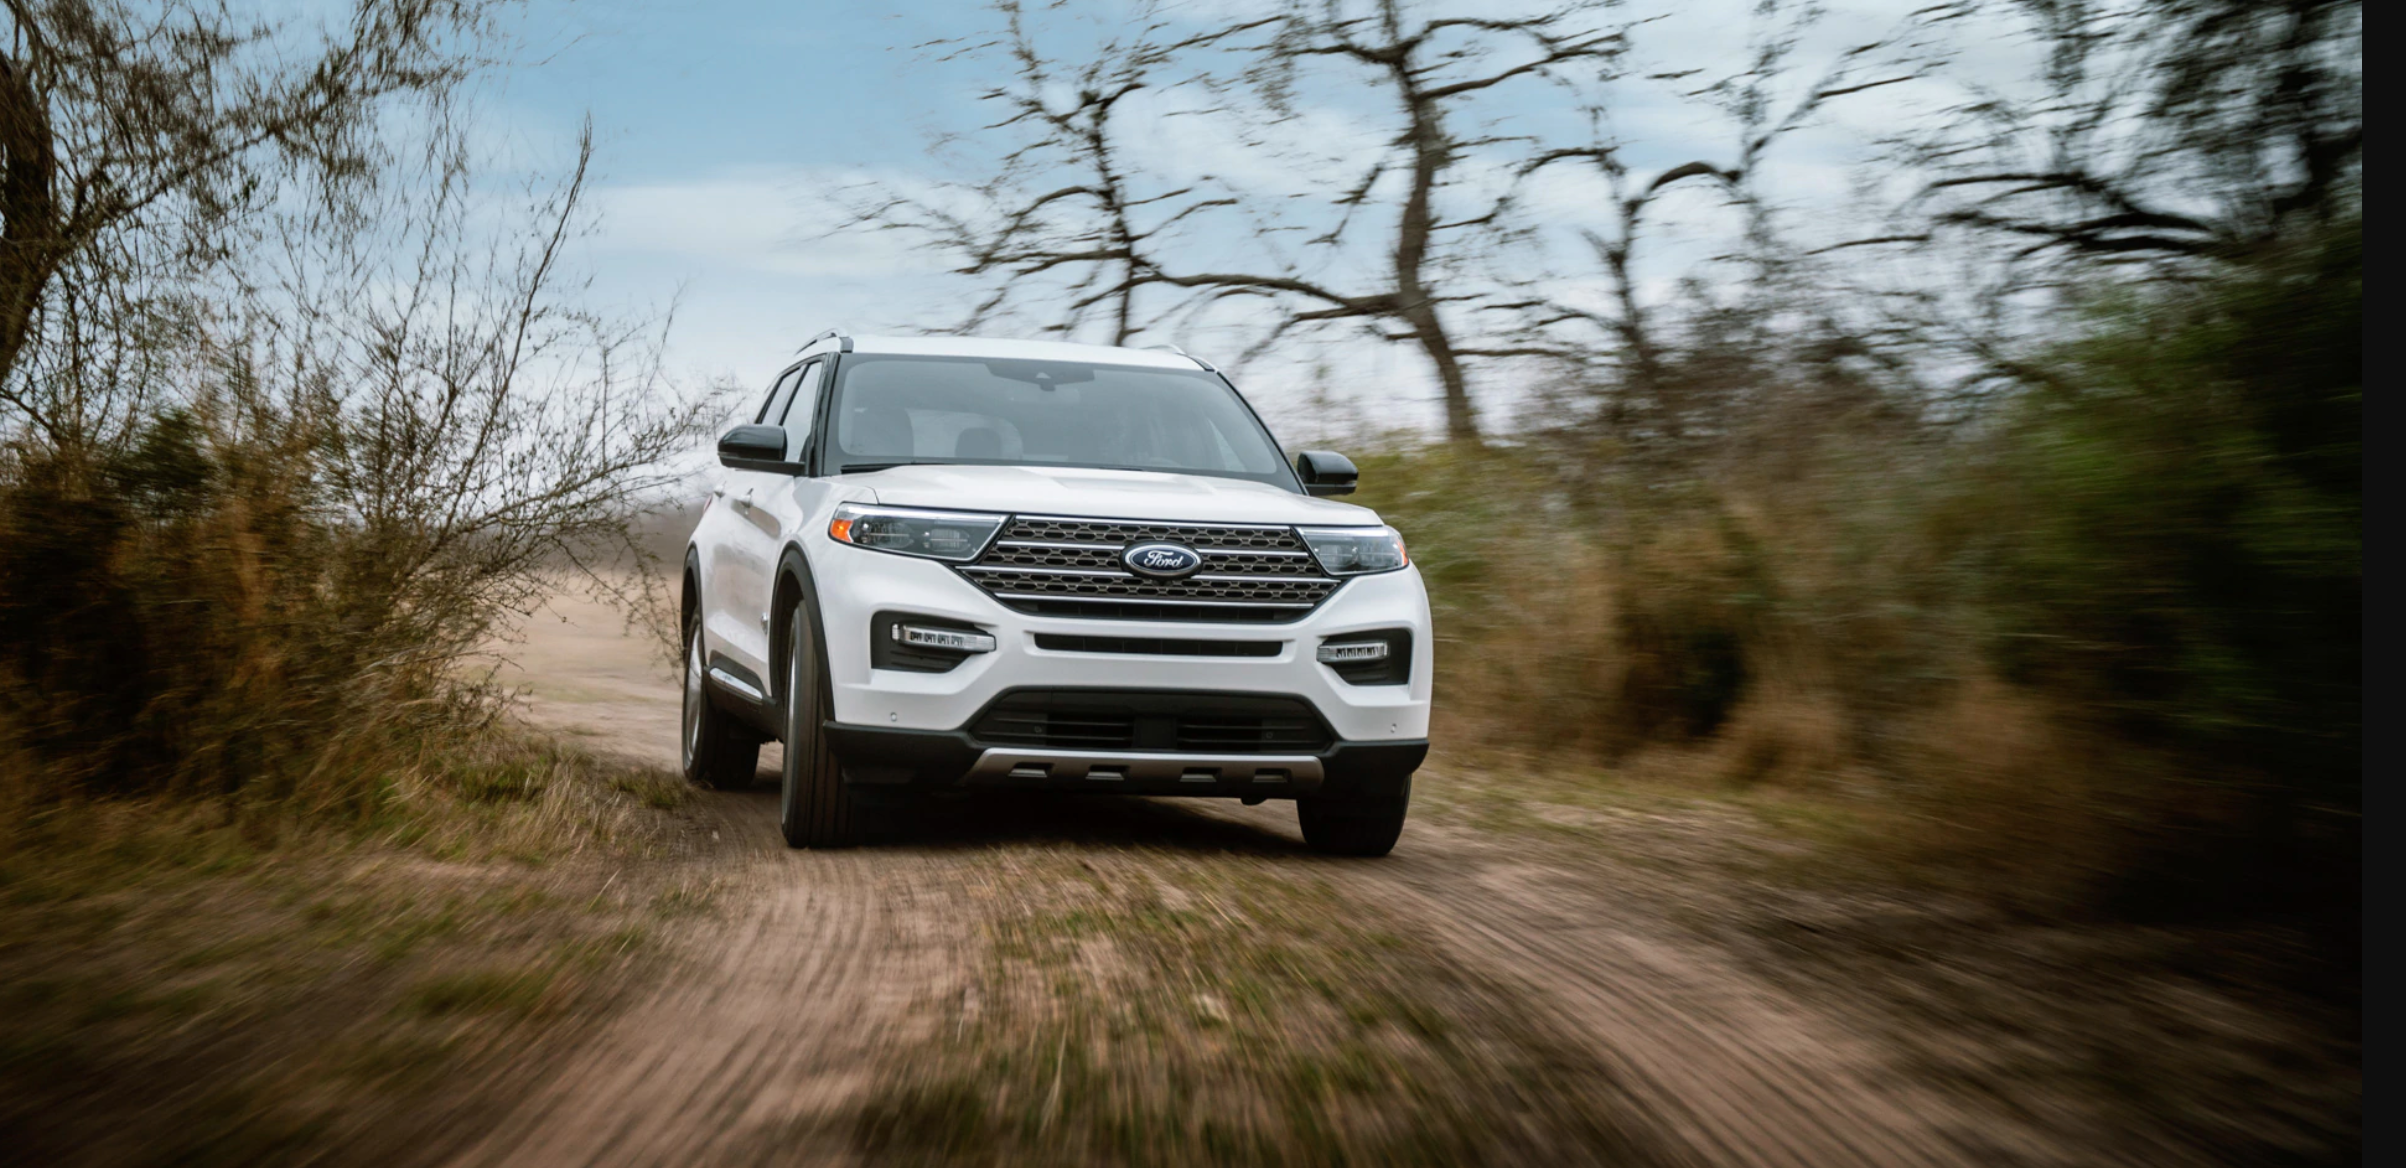 The 2021 Ford Explorer King Ranch edition driving on a dirt road